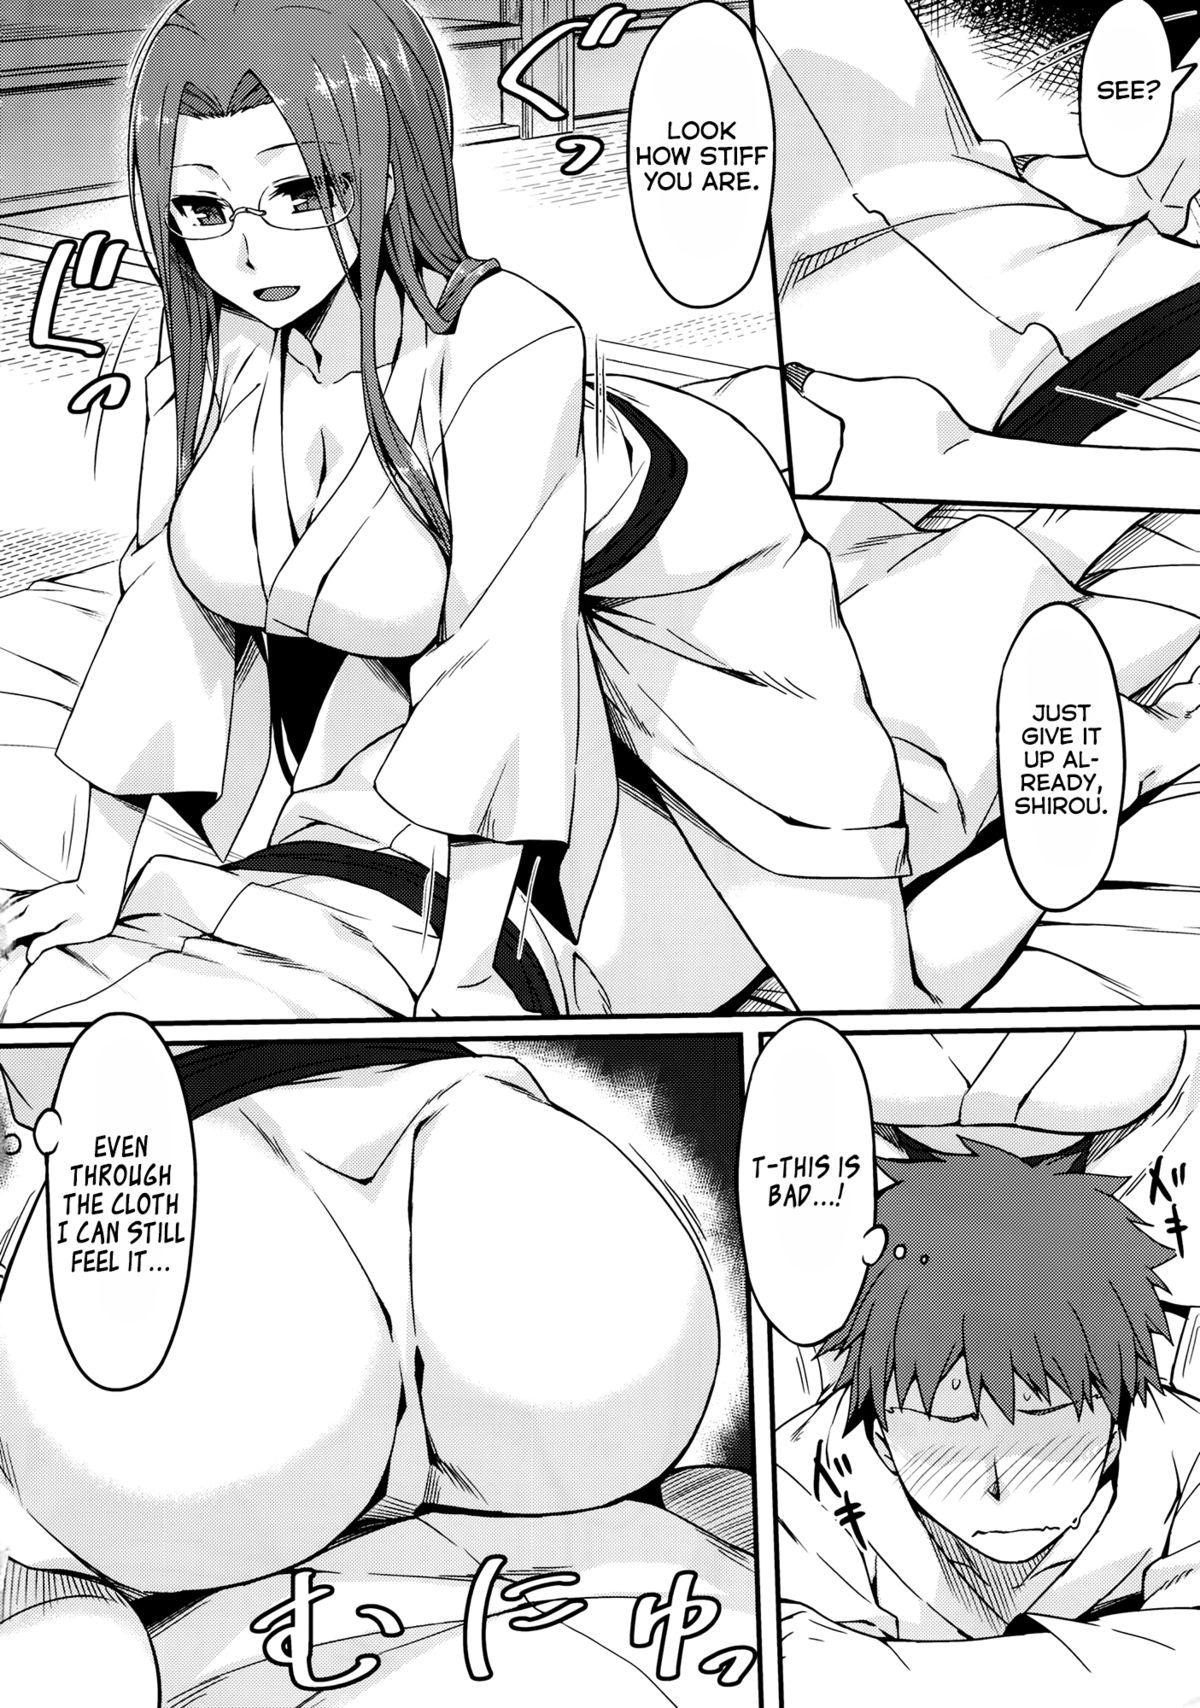 Gay Pov (C88) [S.S.L (Yanagi)] Rider-san to Onsen Yado. Sonogo | Hot Spring Inn With Rider-san. After Story (Fate/stay night) [English] [Facedesk] - Fate stay night Big Butt - Page 4